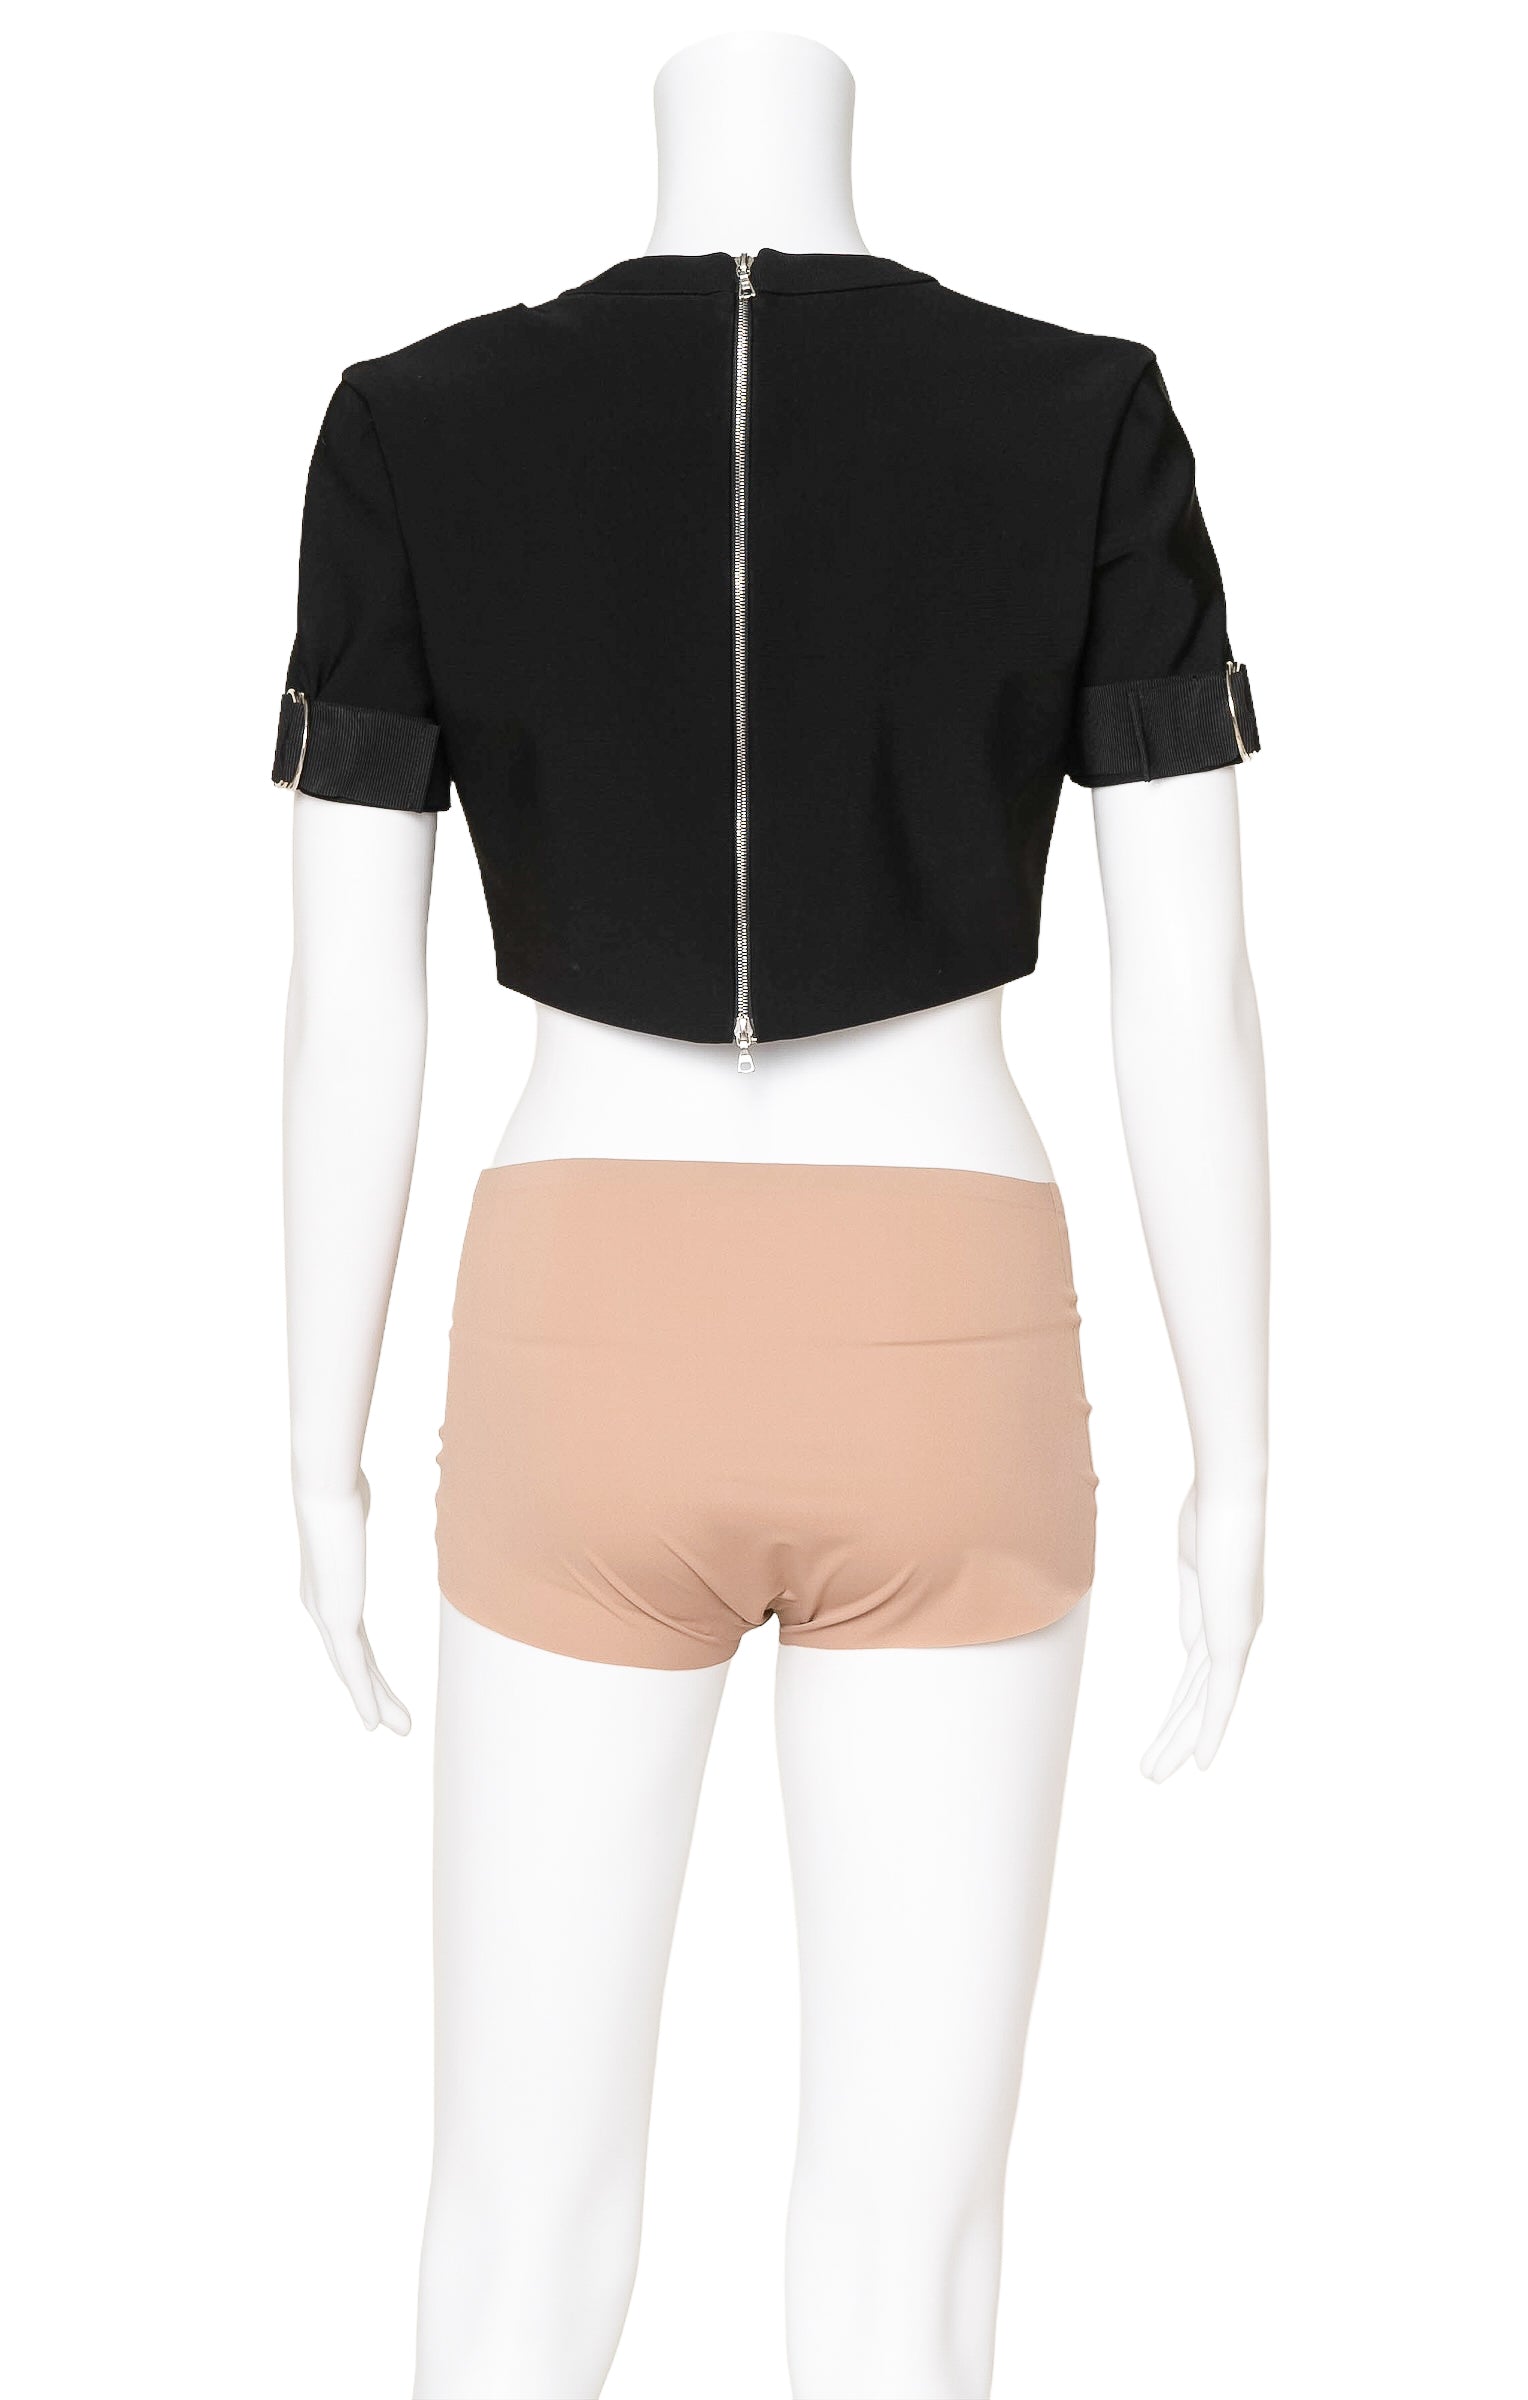 MUGLER (NEW) with tags Top Size: FR 40 / Comparable to US 6-8